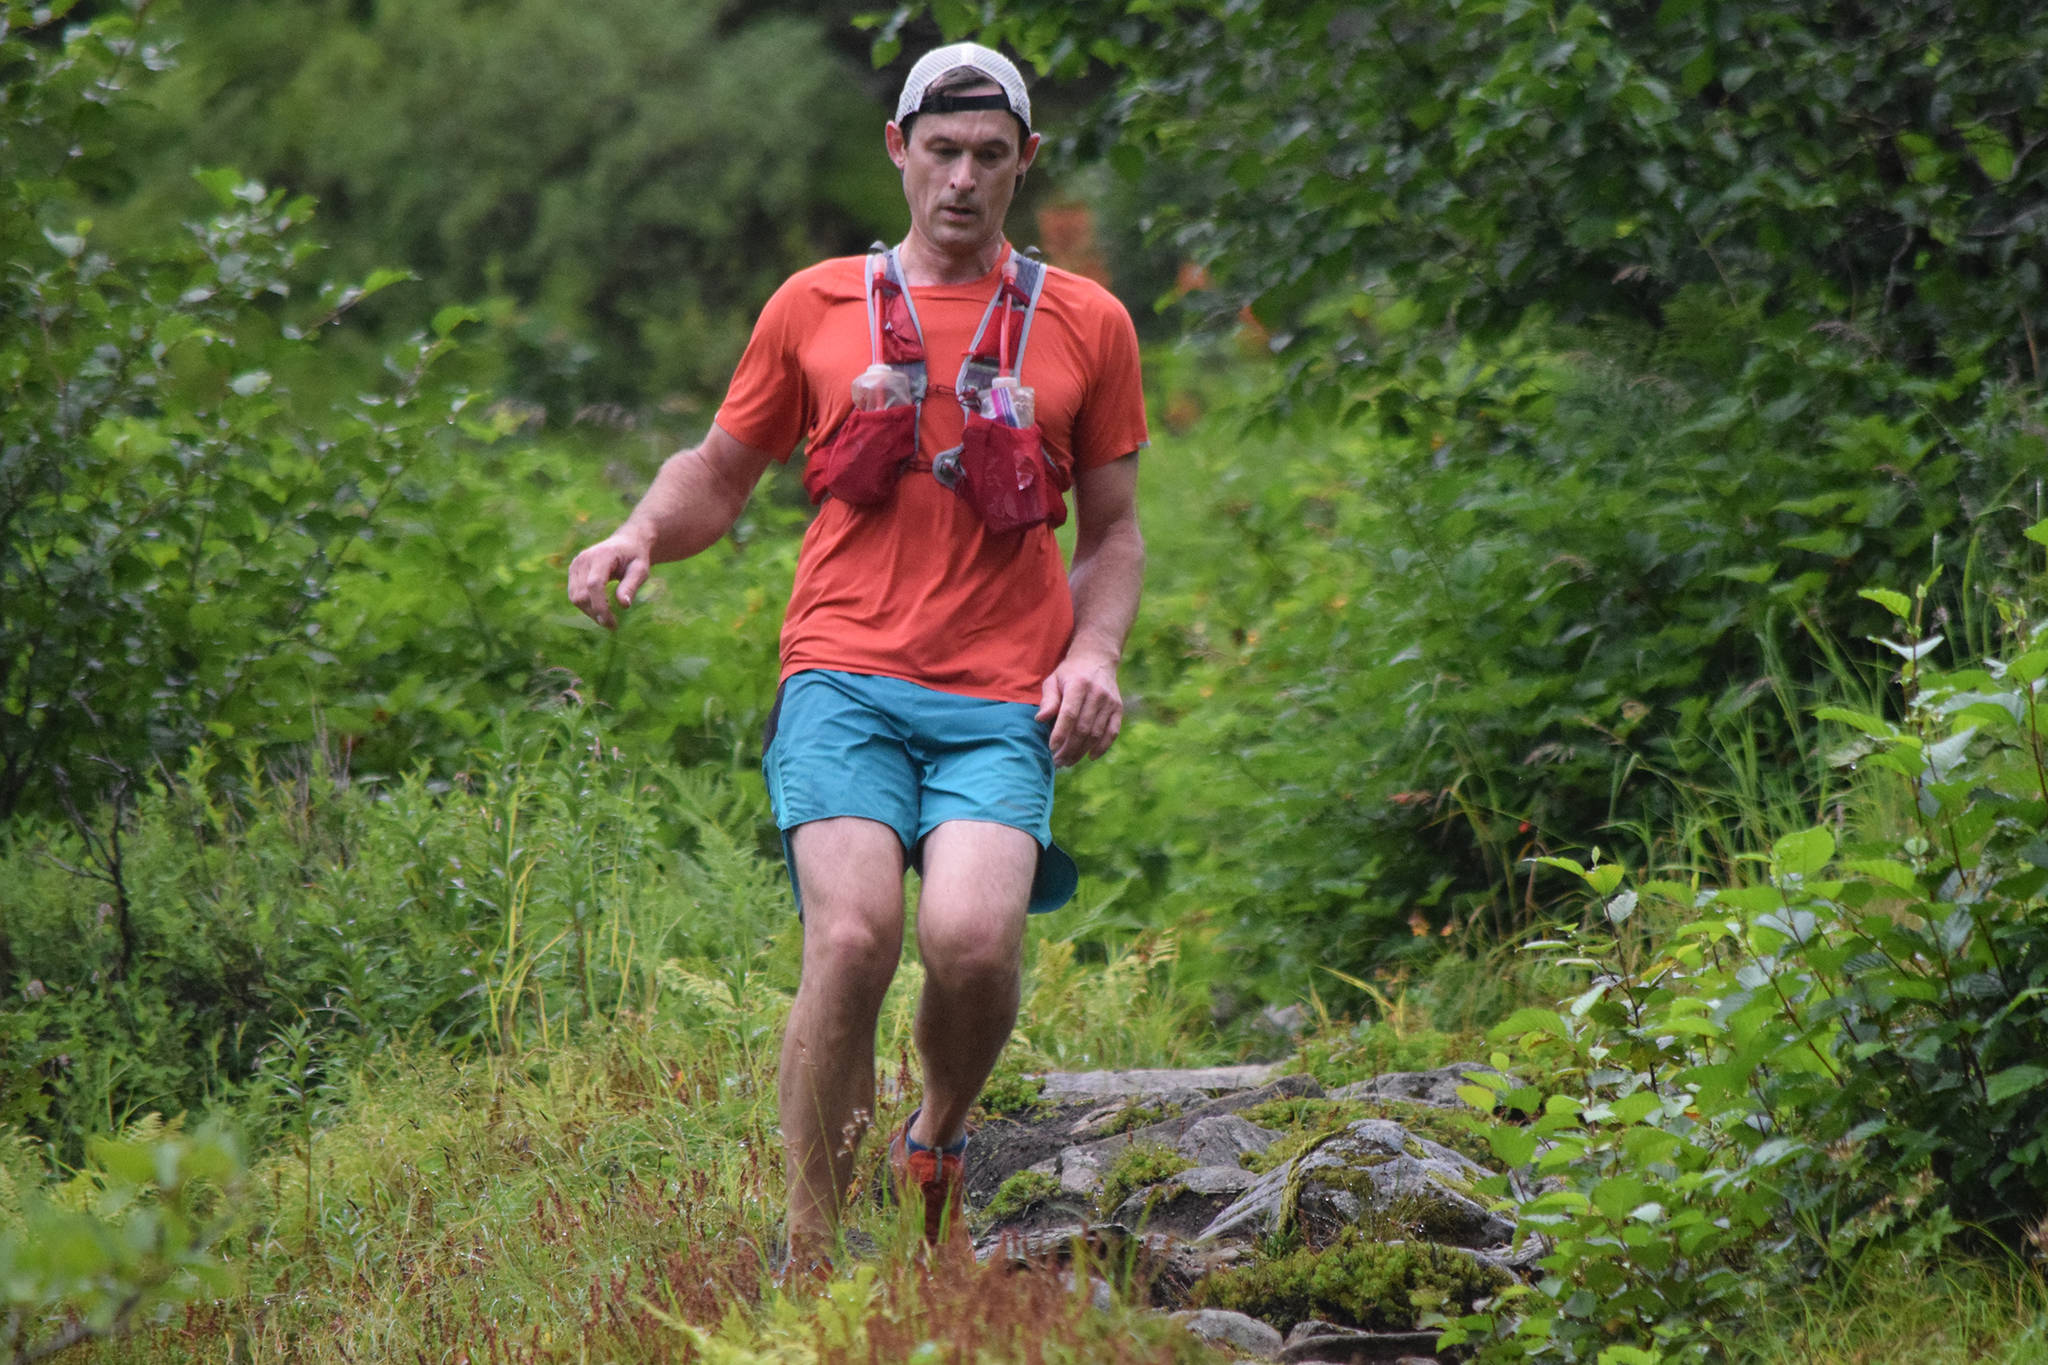 Sean Reilly descends from Mount Juneau along the Granite Creek Trail while competing in the Juneau Ridge Race on Saturday, July 20, 2019. Over 60 runners participated in the 15-mile mountain running race that featured approximately 5,000 feet of elevation gain. (Nolin Ainsworth | Juneau Empire)